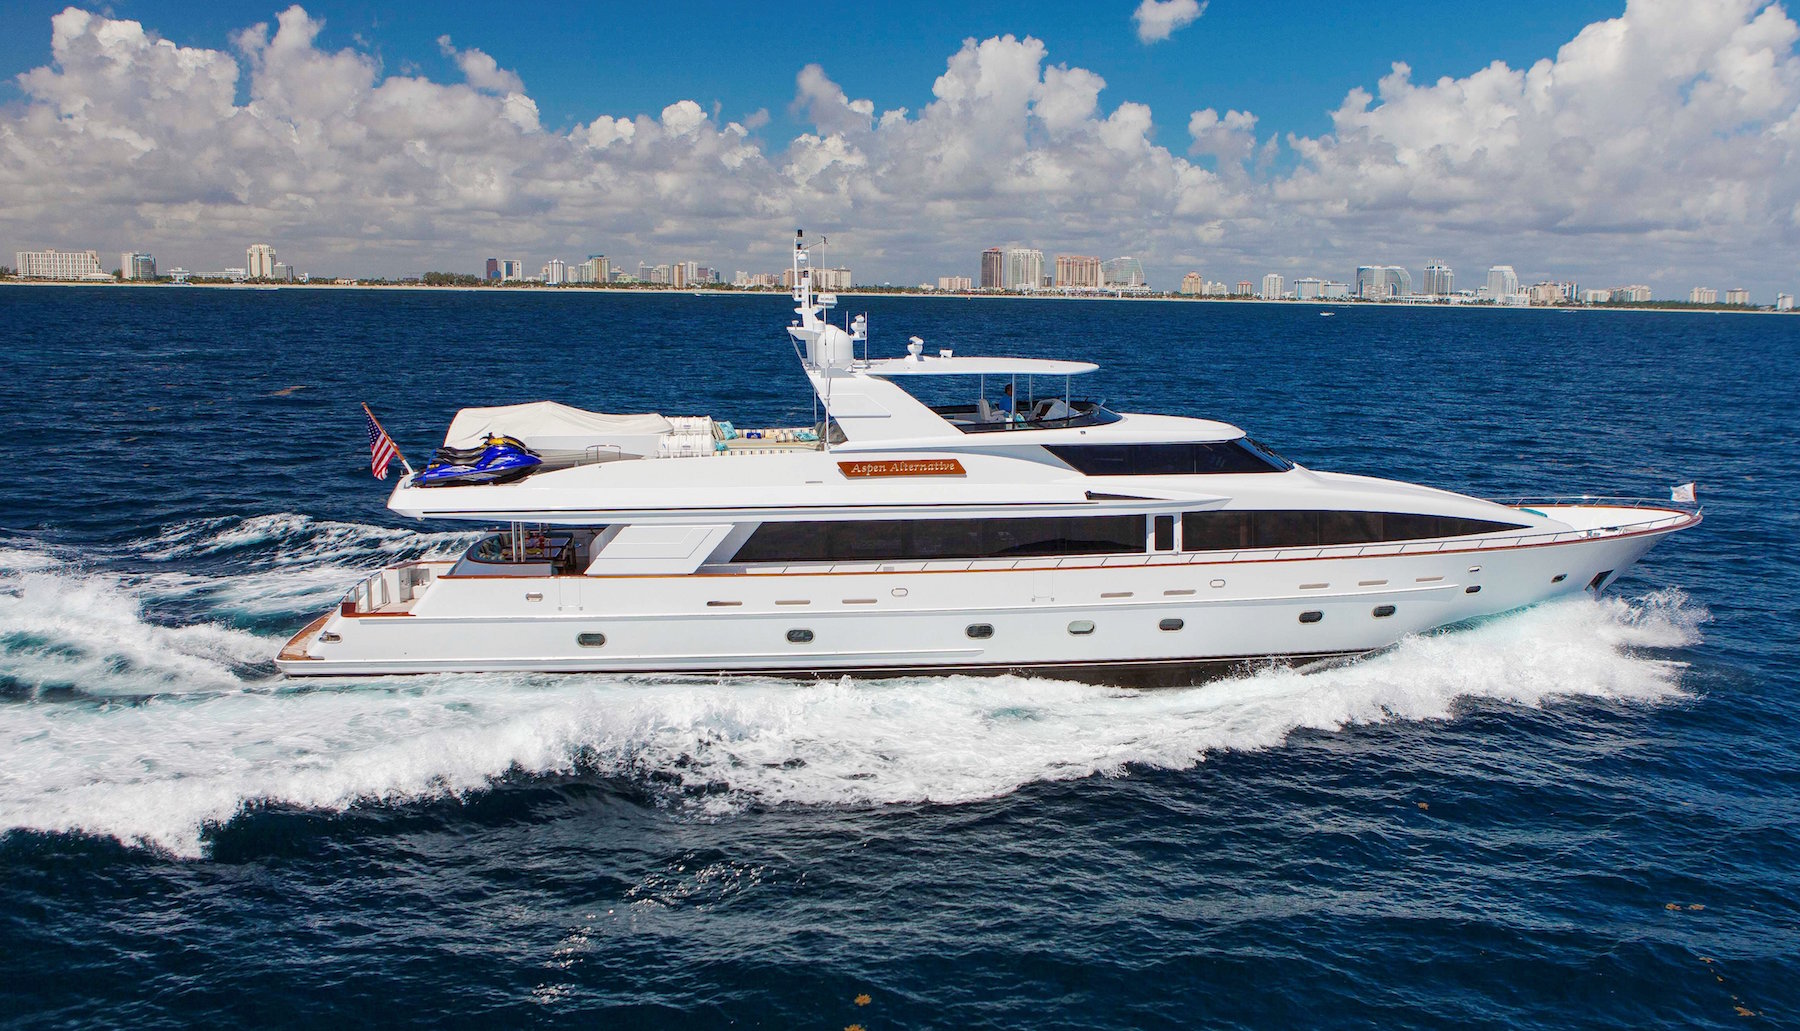 YACHTZOO is delighted to announce the sale of ASPEN ALTERNATIVE